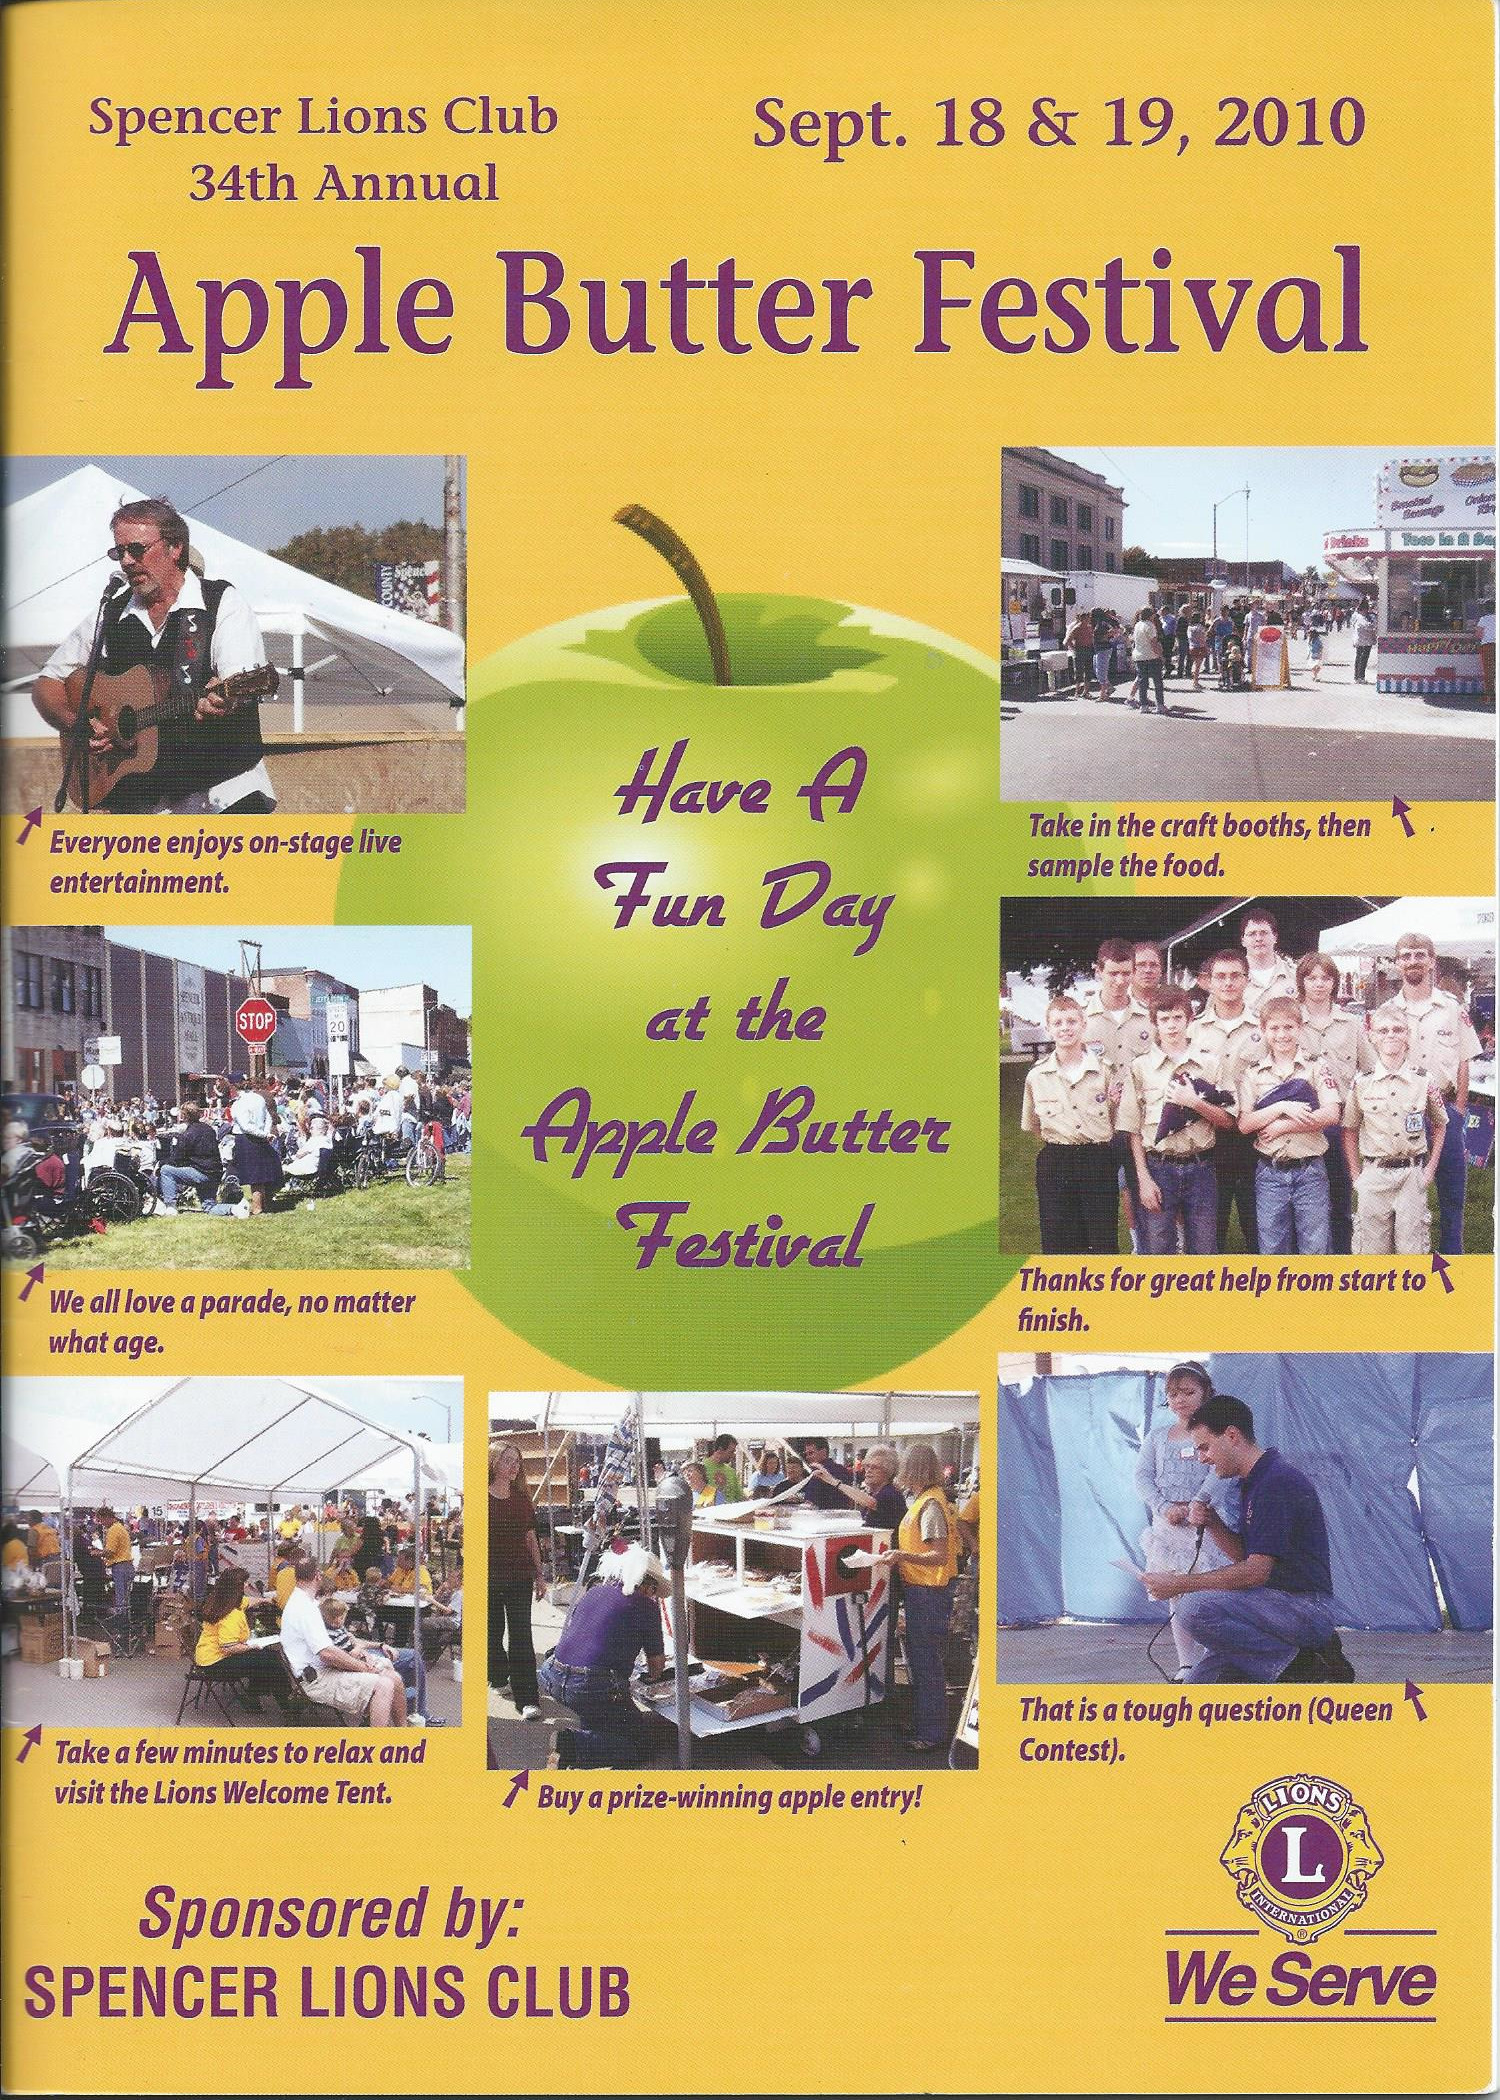 The Apple Butter Festival Helping our community one festival at a time!